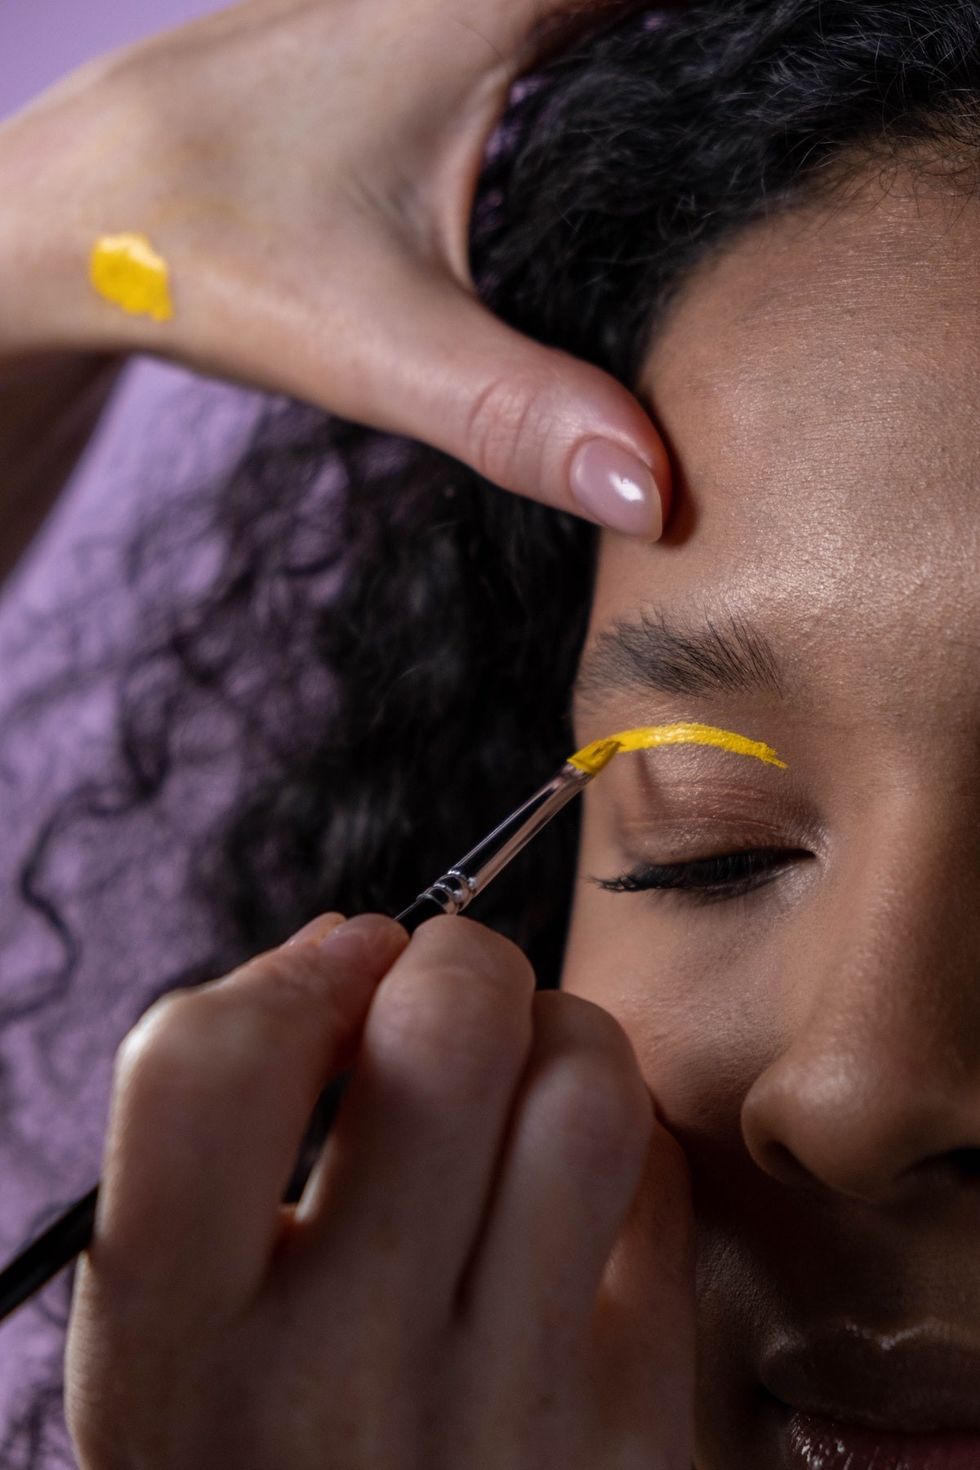 woman getting her eyelid painted yellow